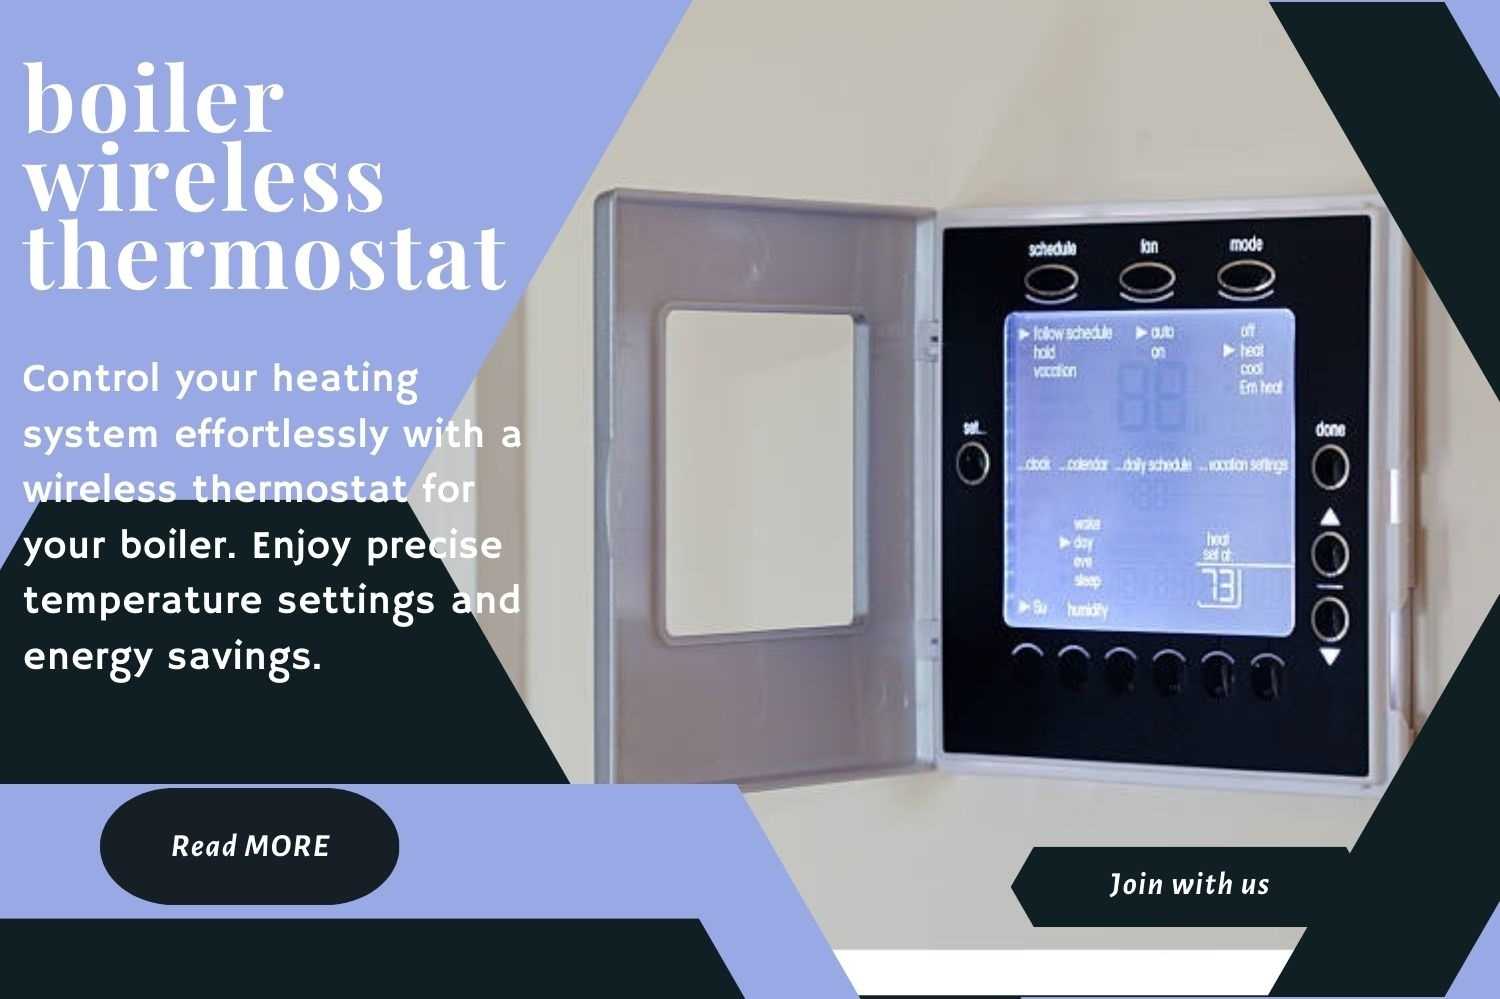 Smart wireless thermostat for boiler control